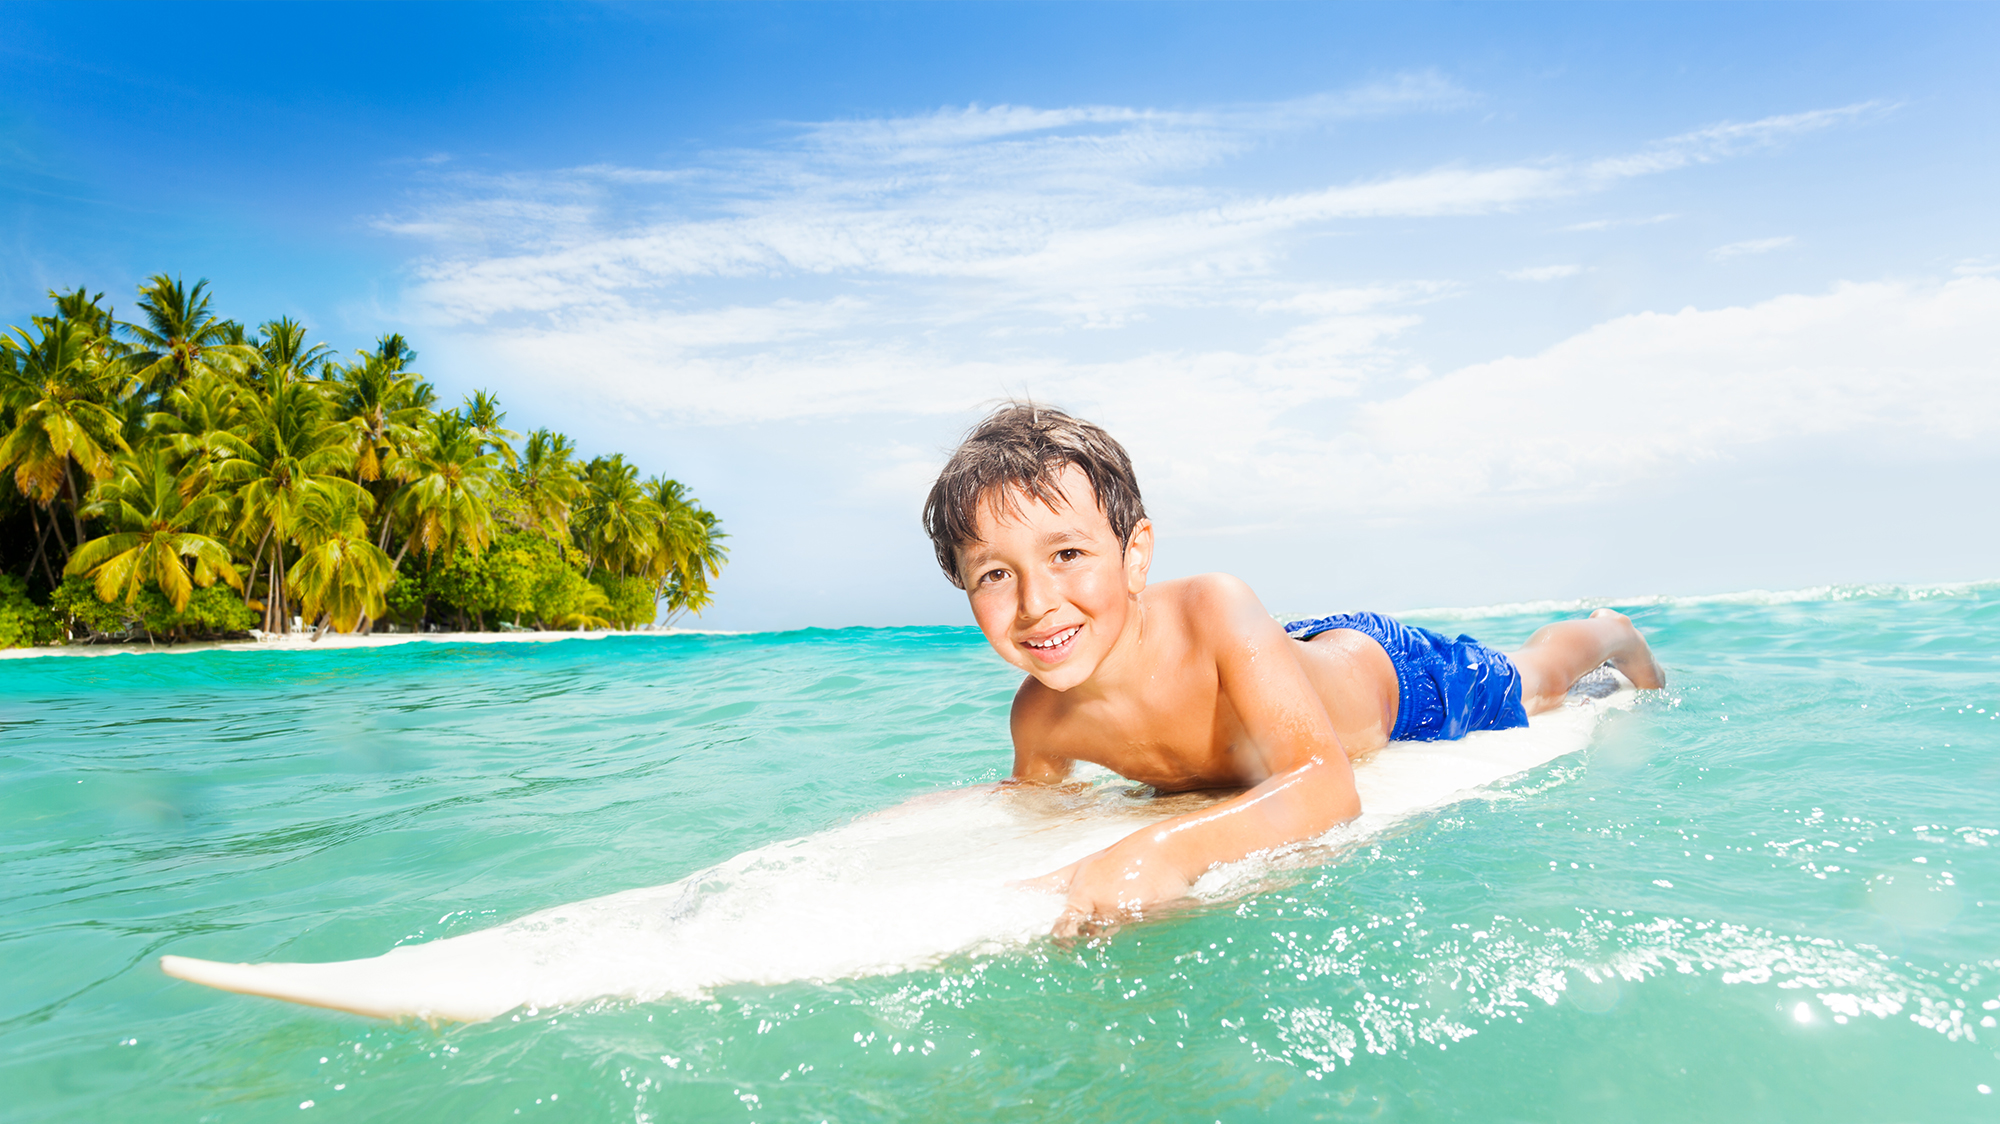 Young boy on a surfboard